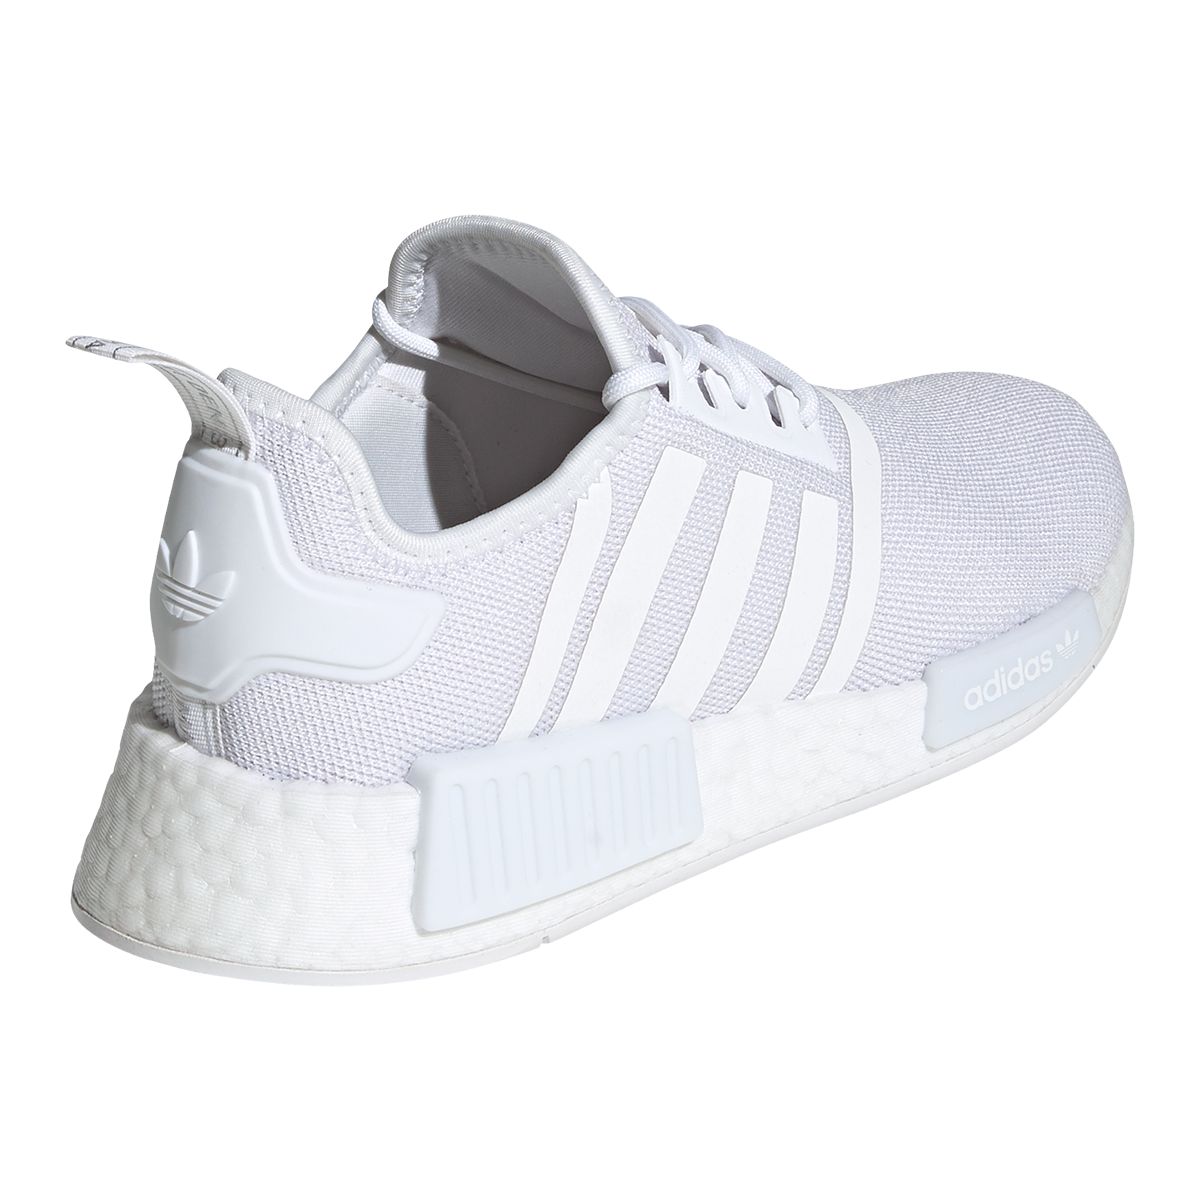 Adidas NMD R2 Women's AQ0197 Ash Pearl White Boost Running Shoes Size 6